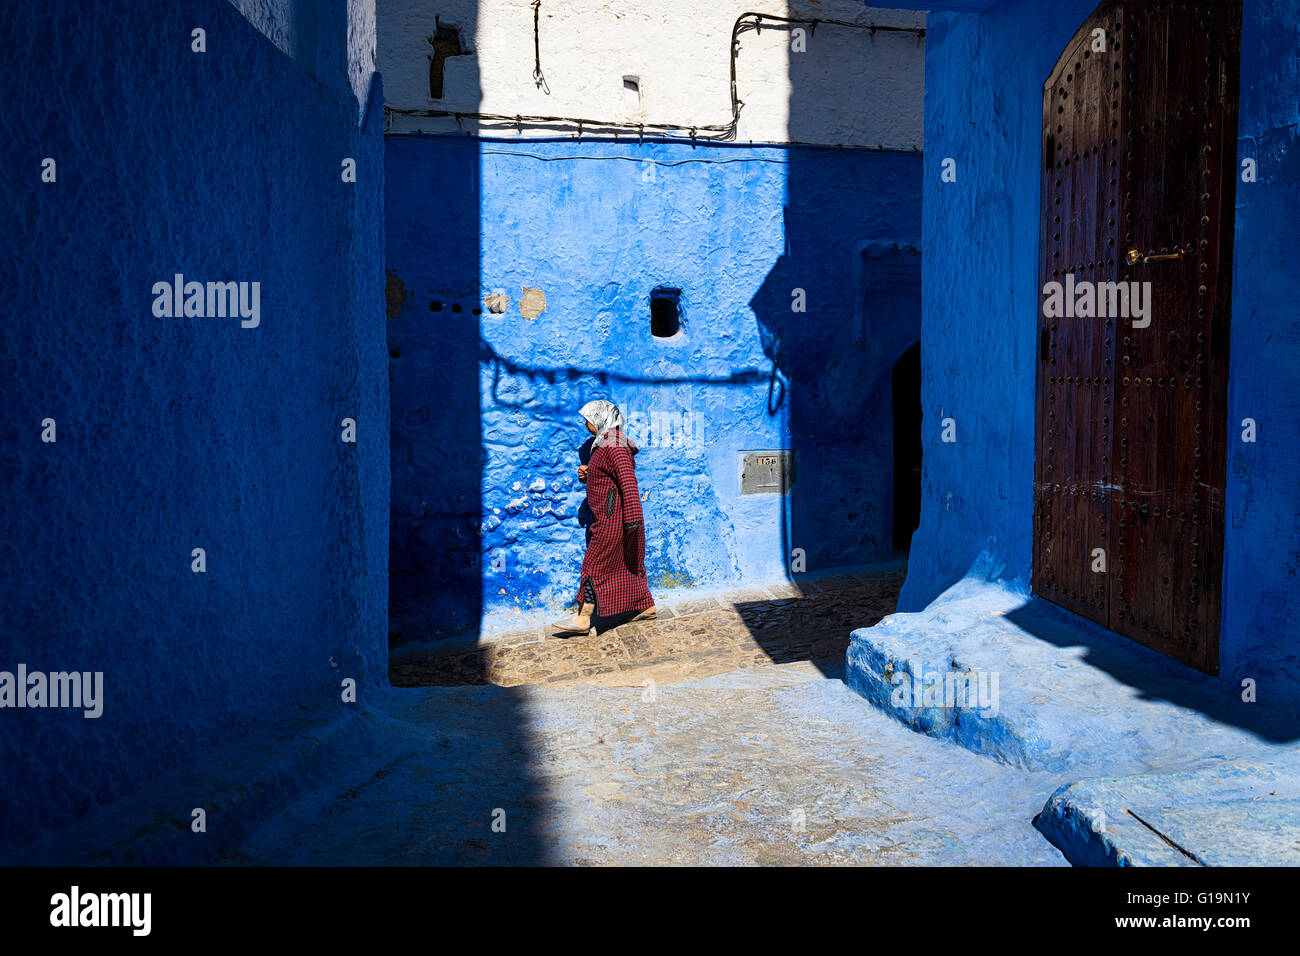 Chefchaouen, Morocco - April 10, 2016: A woman walking in a street of the town of Chefchaouen in Morocco. Stock Photo